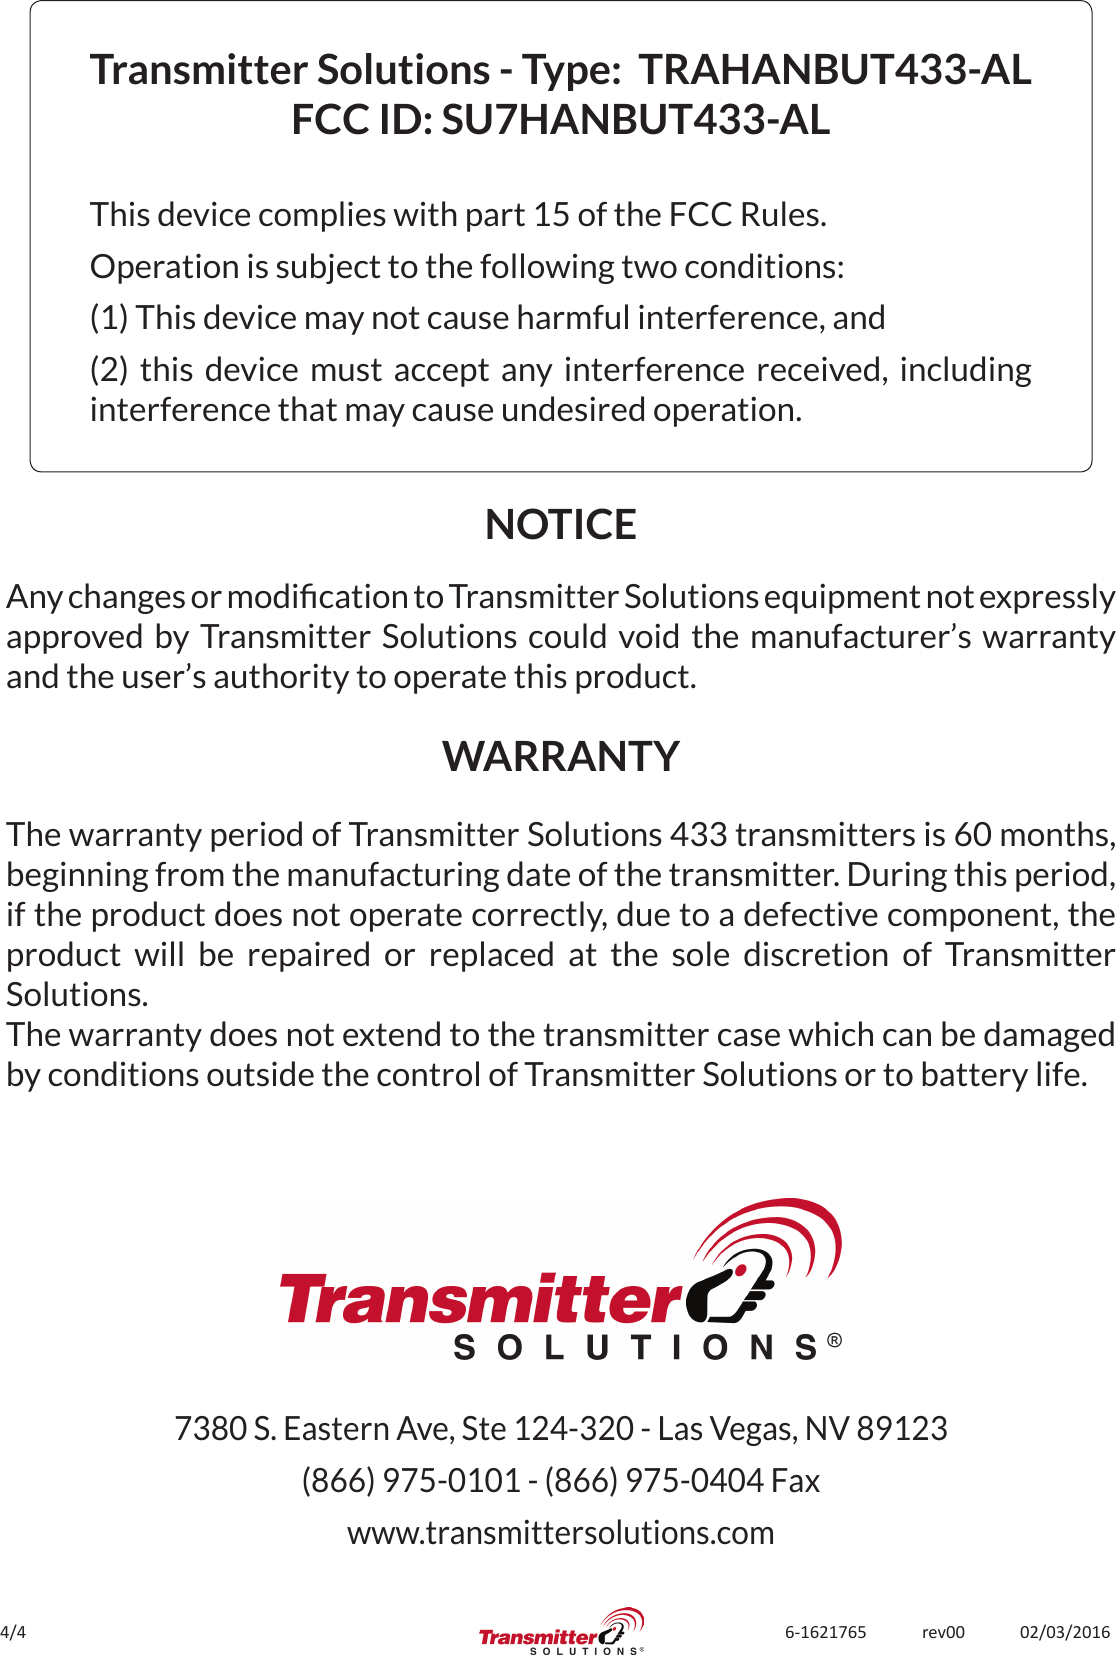 4/4 6-1621765             rev00             02/03/2016Transmitter Solutions - Type:  TRAHANBUT433-ALFCC ID: SU7HANBUT433-ALThis device complies with part 15 of the FCC Rules.Operation is subject to the following two conditions:(1) This device may not cause harmful interference, and(2) this device must accept any interference received, including interference that may cause undesired operation.The warranty period of Transmitter Solutions 433 transmitters is 60 months, beginning from the manufacturing date of the transmitter. During this period, if the product does not operate correctly, due to a defective component, the product will be repaired or replaced at the sole discretion of Transmitter Solutions. The warranty does not extend to the transmitter case which can be damaged by conditions outside the control of Transmitter Solutions or to battery life.NOTICEWARRANTYAny changes or modication to Transmitter Solutions equipment not expressly approved by Transmitter Solutions could void the manufacturer’s warranty and the user’s authority to operate this product.7380 S. Eastern Ave, Ste 124-320 - Las Vegas, NV 89123(866) 975-0101 - (866) 975-0404 Faxwww.transmittersolutions.com